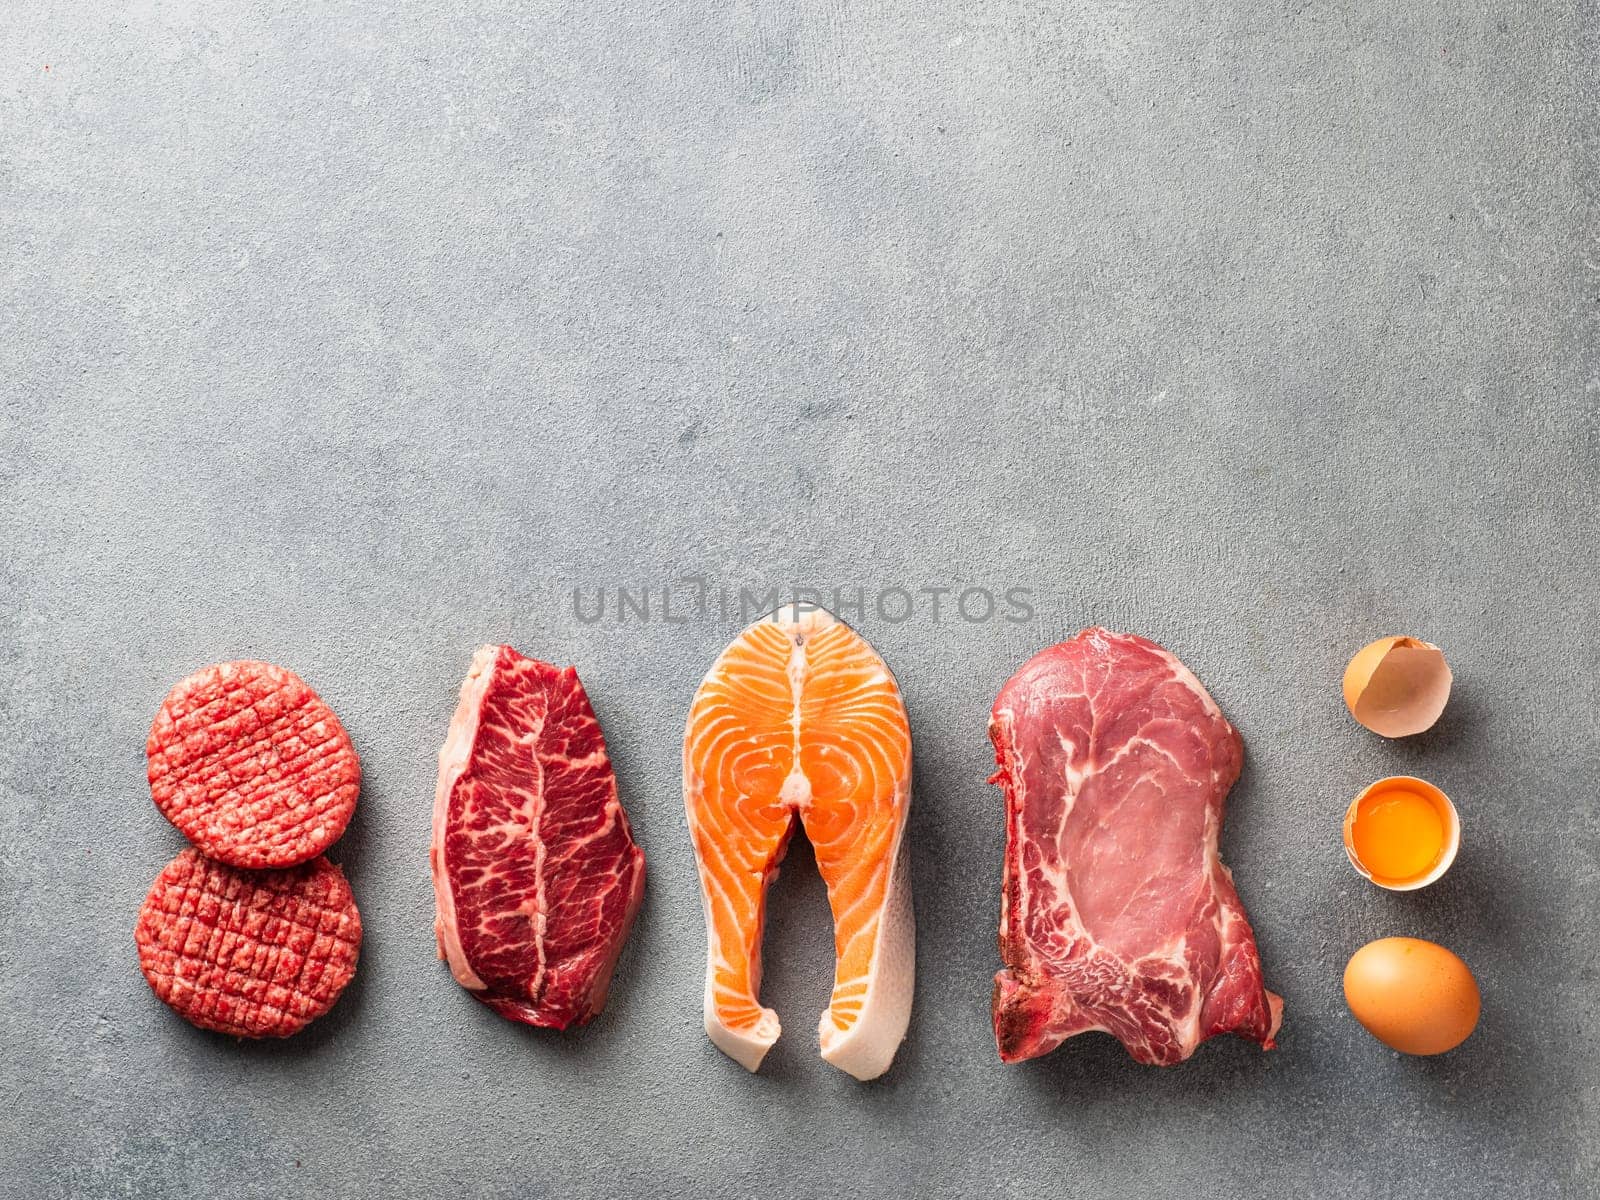 Carnivore or keto diet concept. Raw ingredients for zero carb or low carb diet - burger patties, ribeye, salmon steak, pork, egg on gray stone background. Top view or flat lay. Copy space top